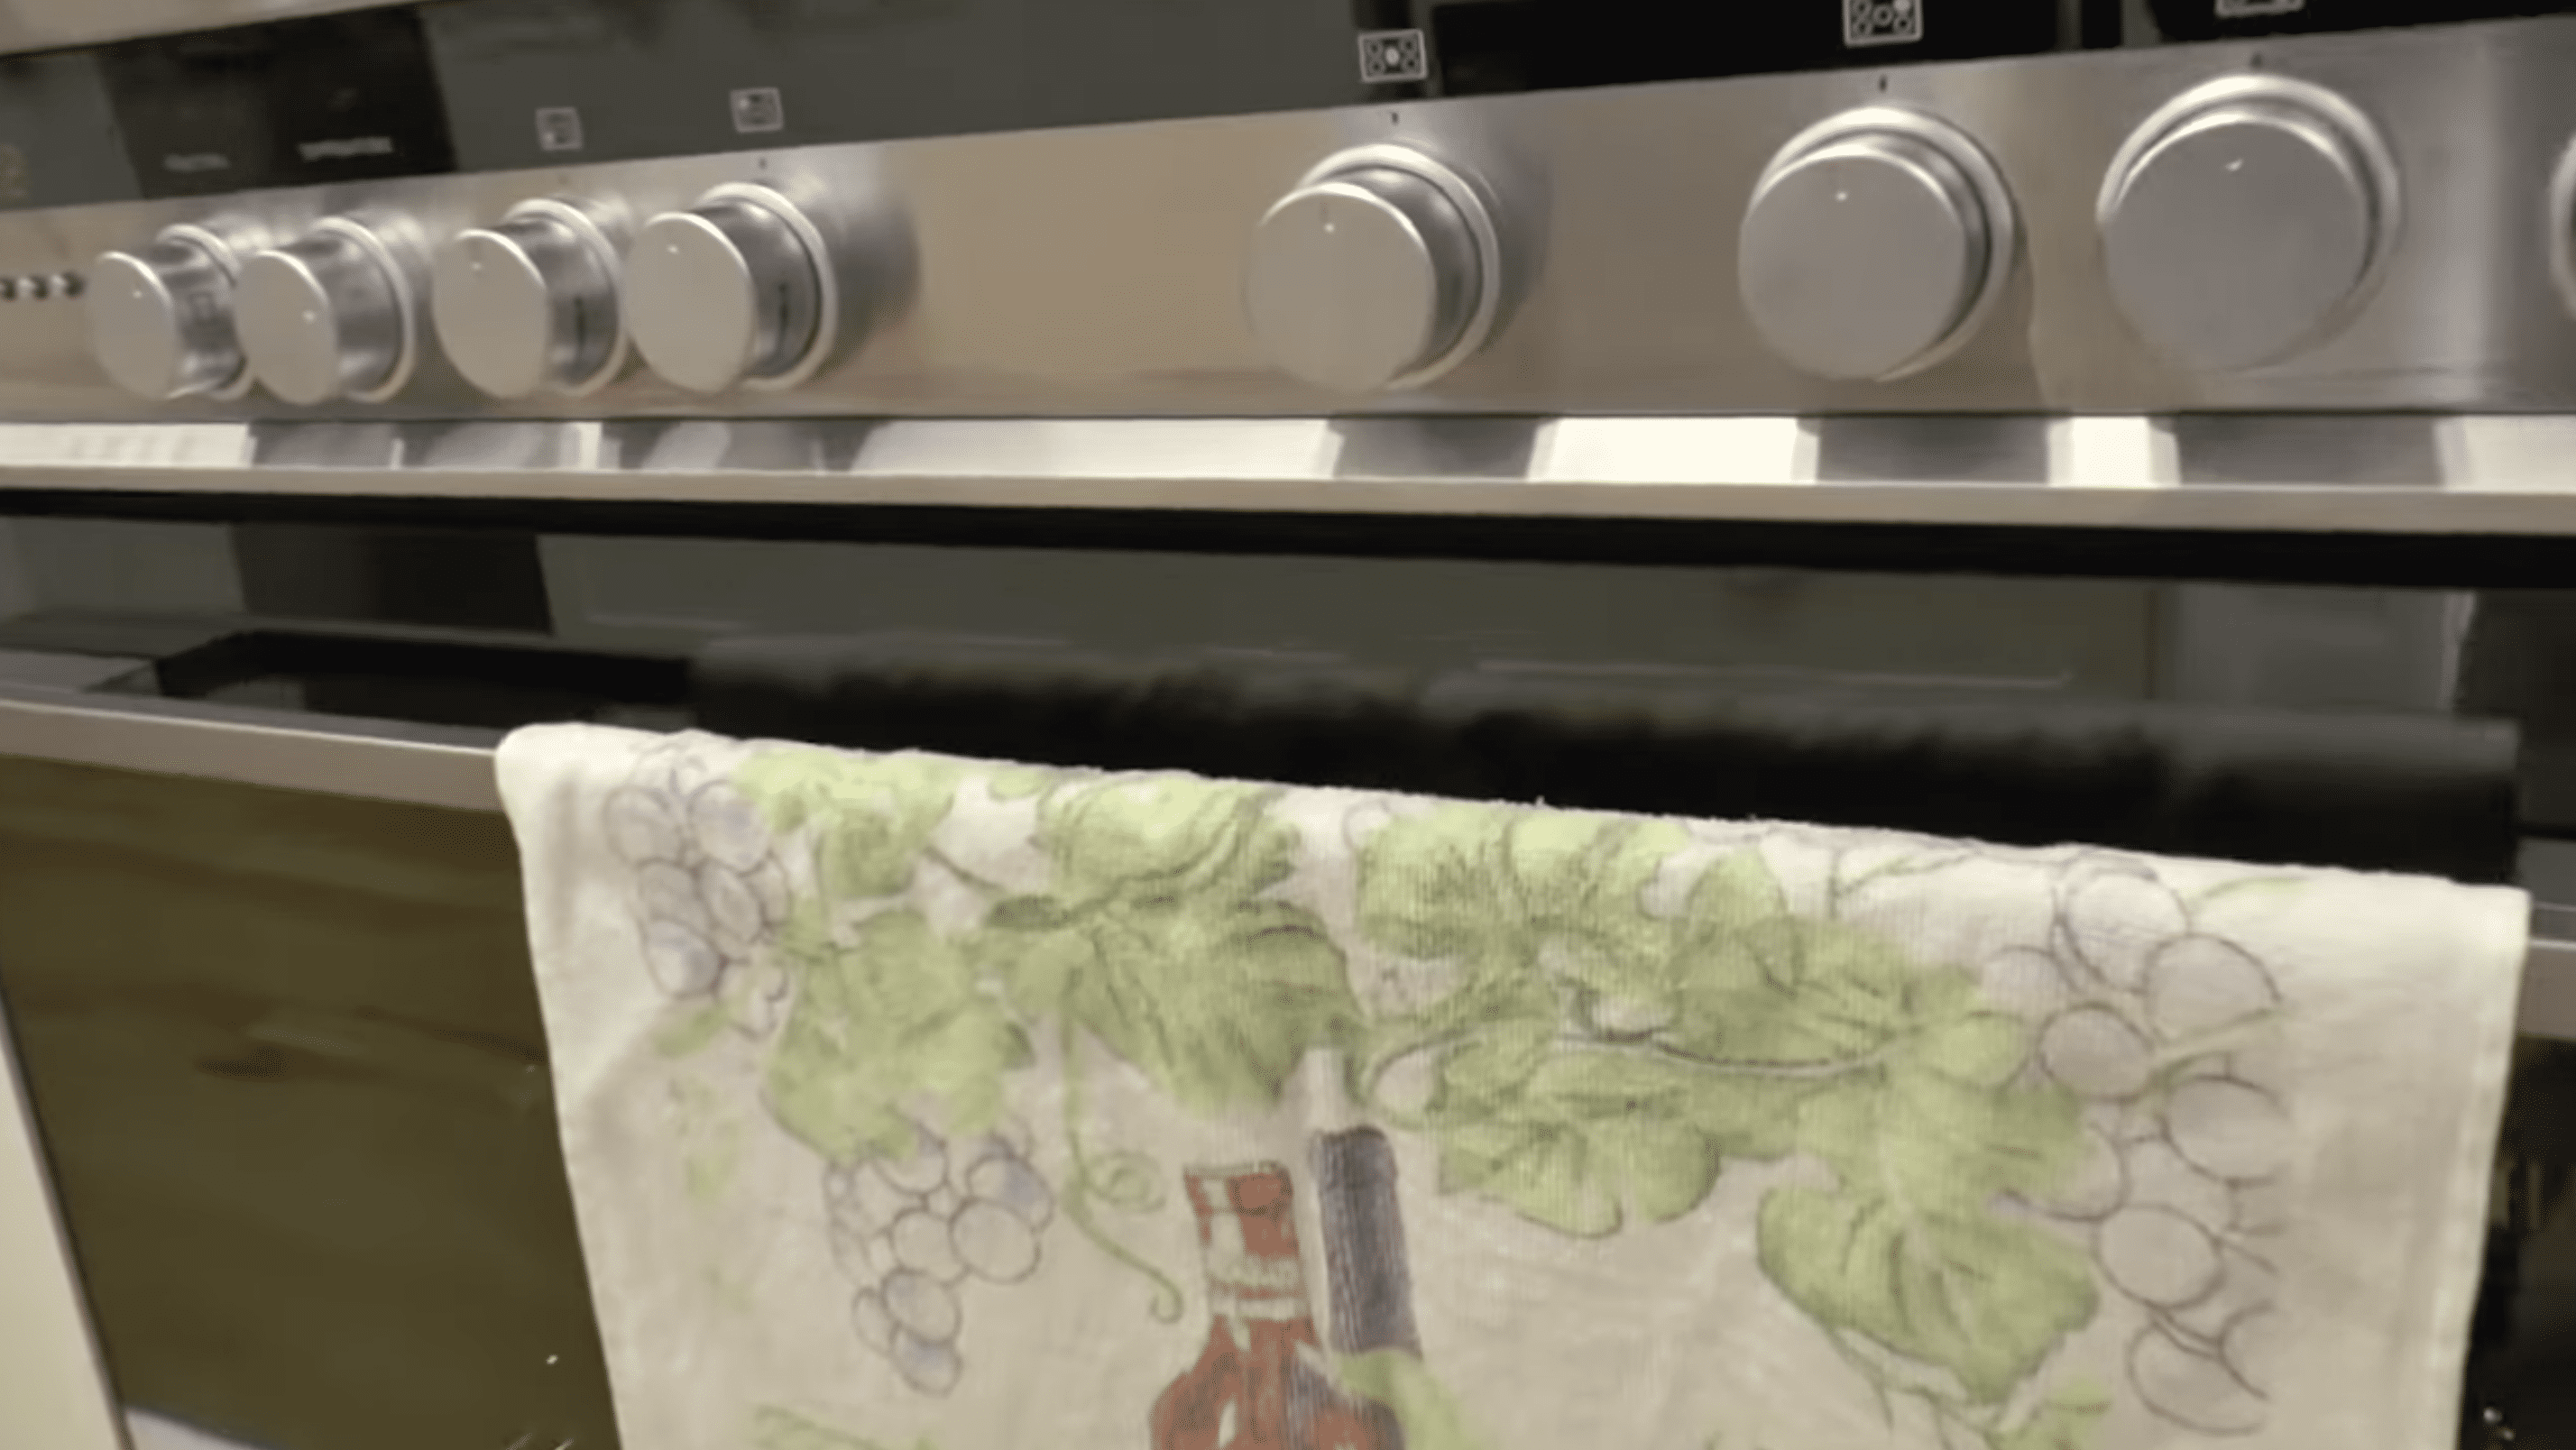 A closer view of Amanda's oven hiding a special surprise from the giveaway crew. | Photo: YouTube.com/Kyle and Jackie O